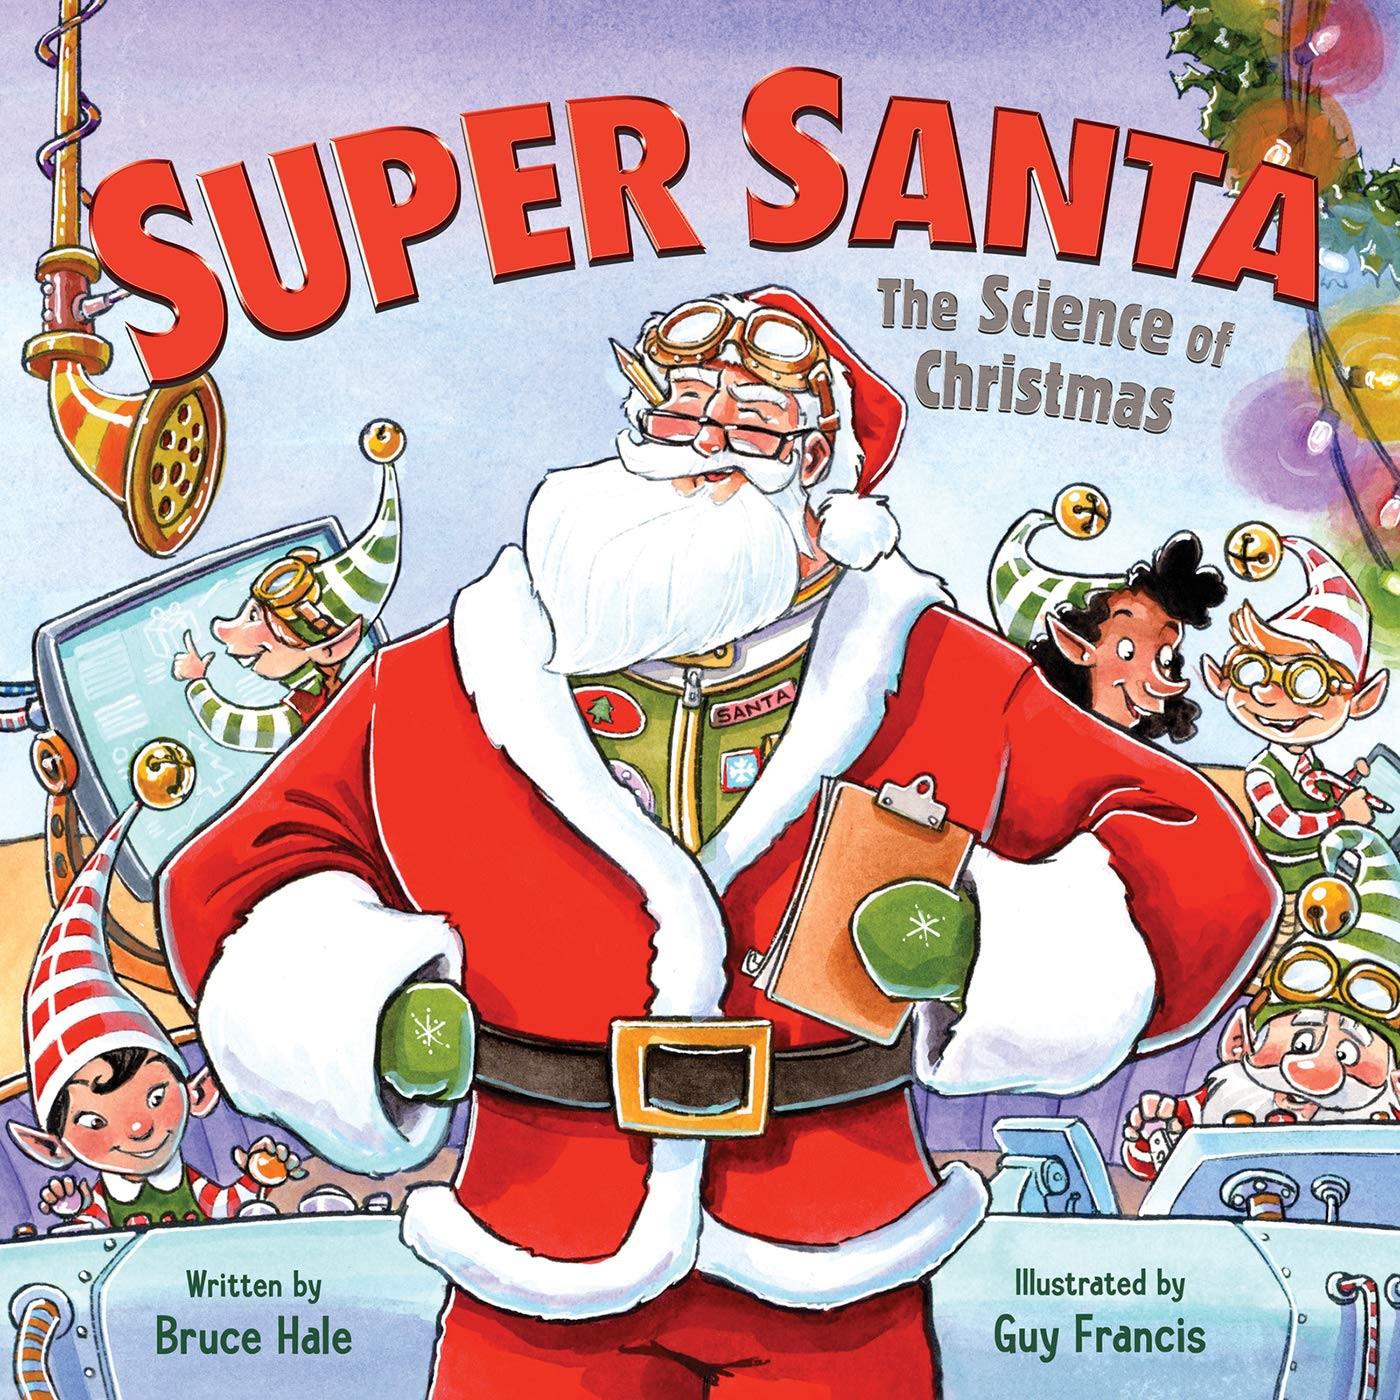 Super Santa: The Science Of Christmas - Bruce Hale & Guy Francis